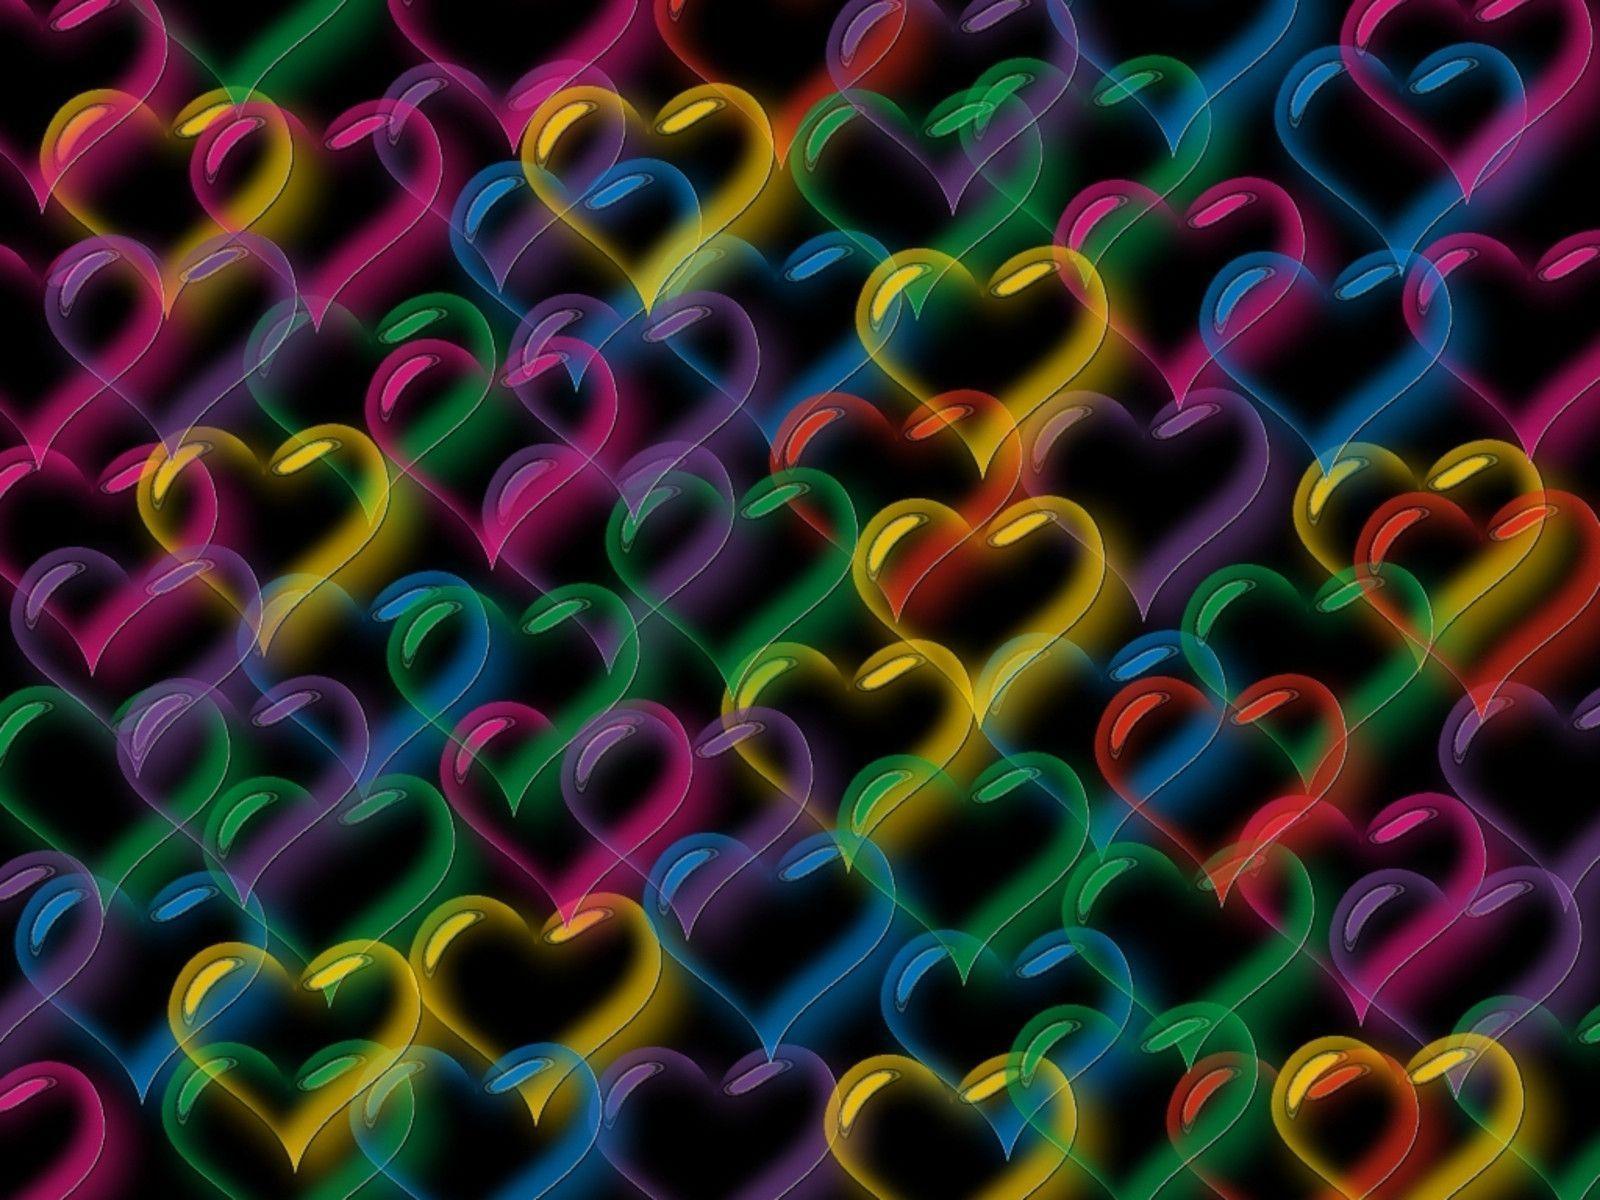 Neon Colors Rock image Bubbles HD wallpaper and background photo